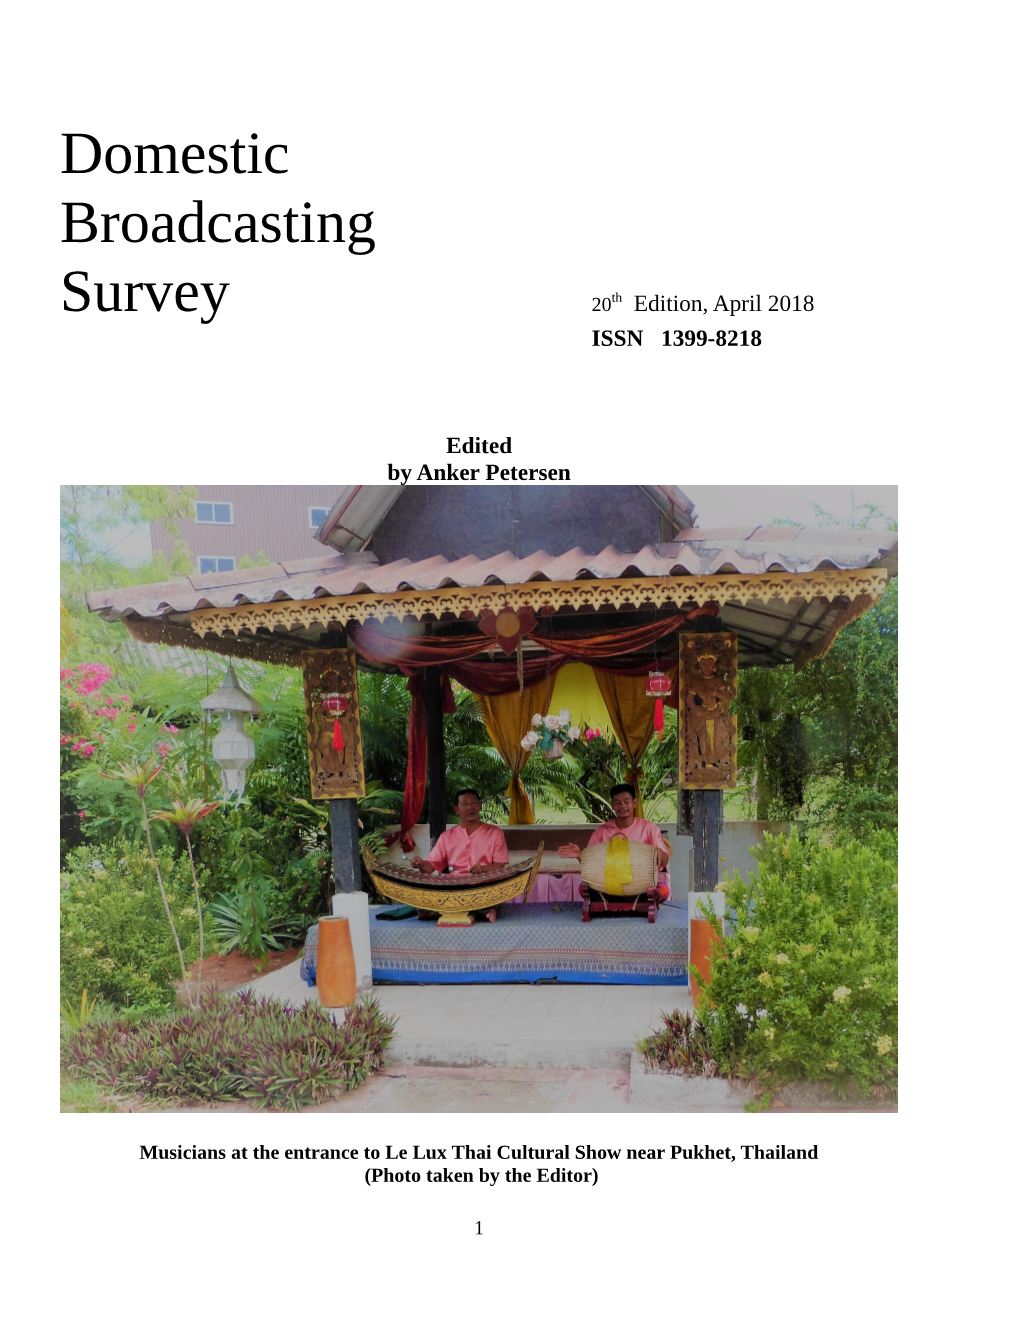 Domestic Broadcasting Survey April 2018 20Th Edition (Including Tropical Bands Survey 46Th Edition)